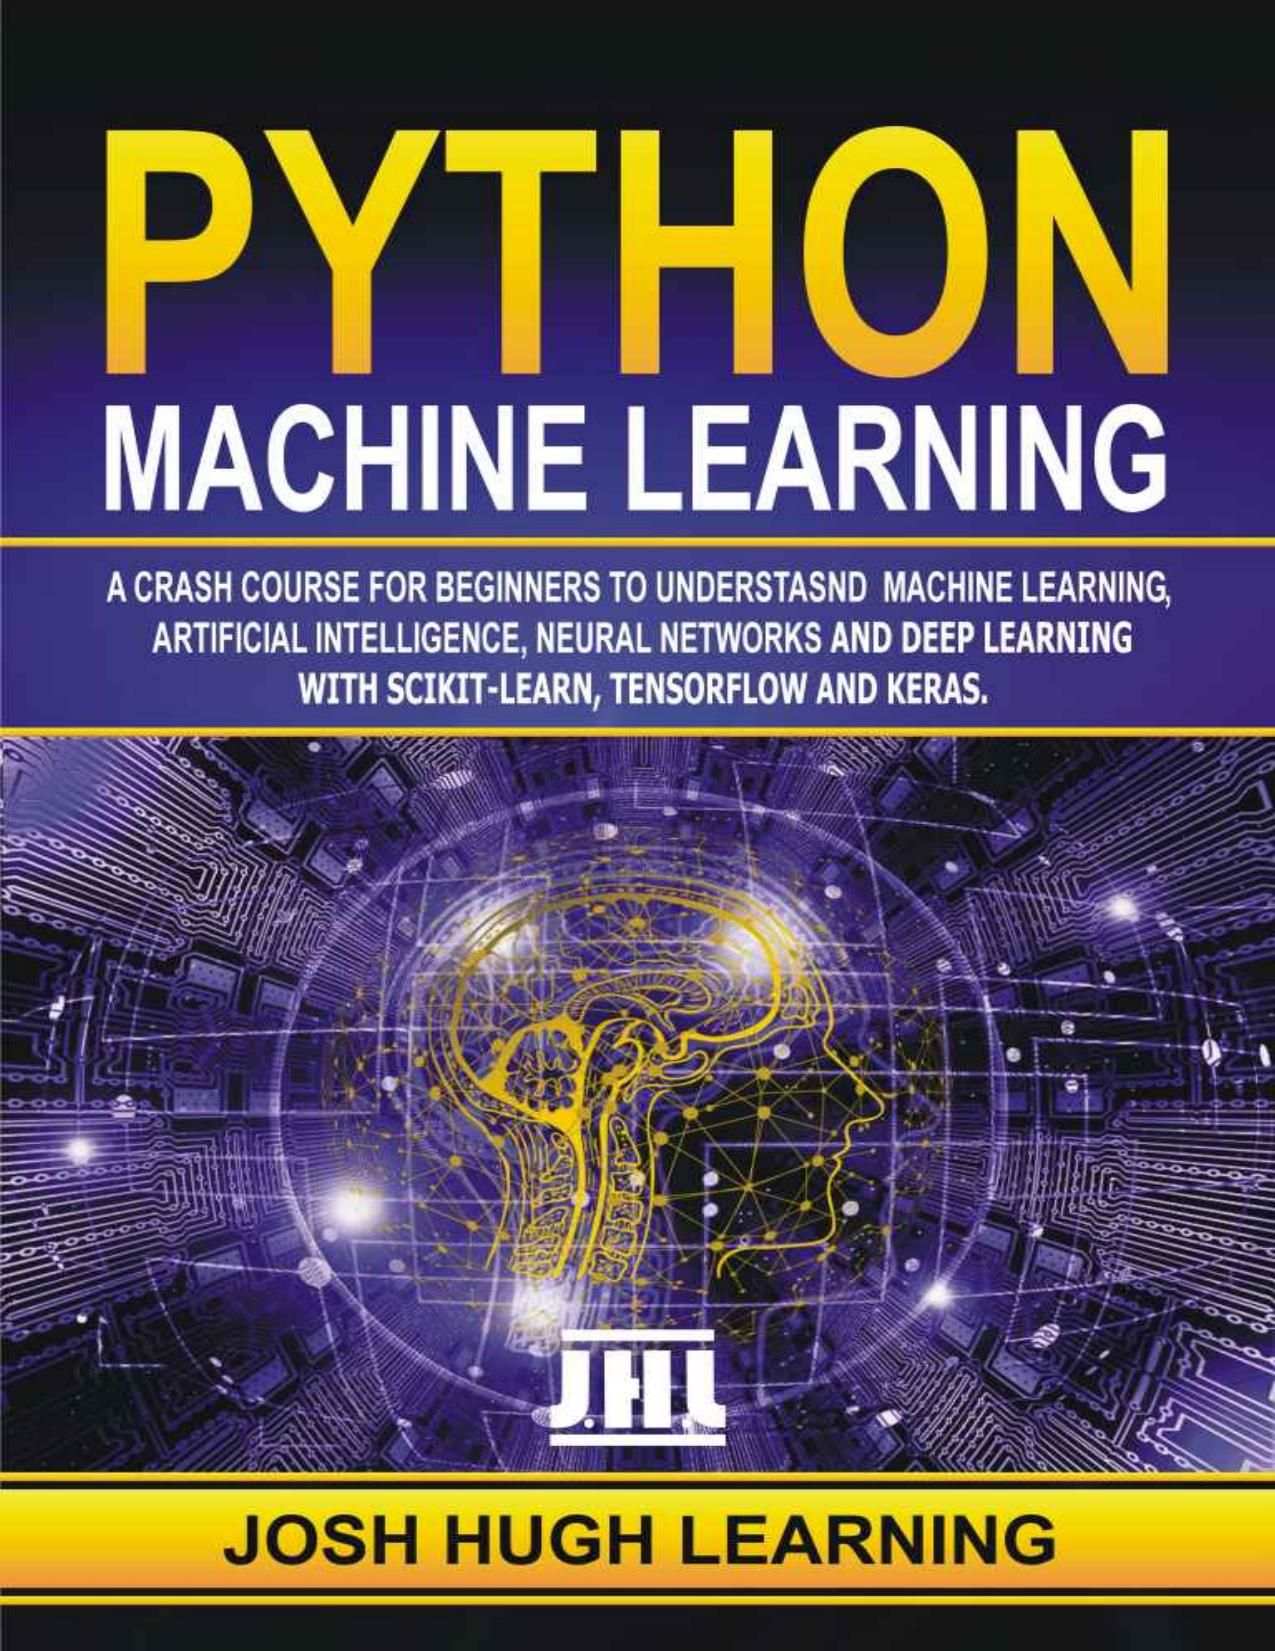 Python Machine Learning. A Crash Course for Beginners to Understand Machine learning, Artificial Intelligence, Neural Networks, and Deep Learning with Scikit-Learn, TensorFlow, and Keras